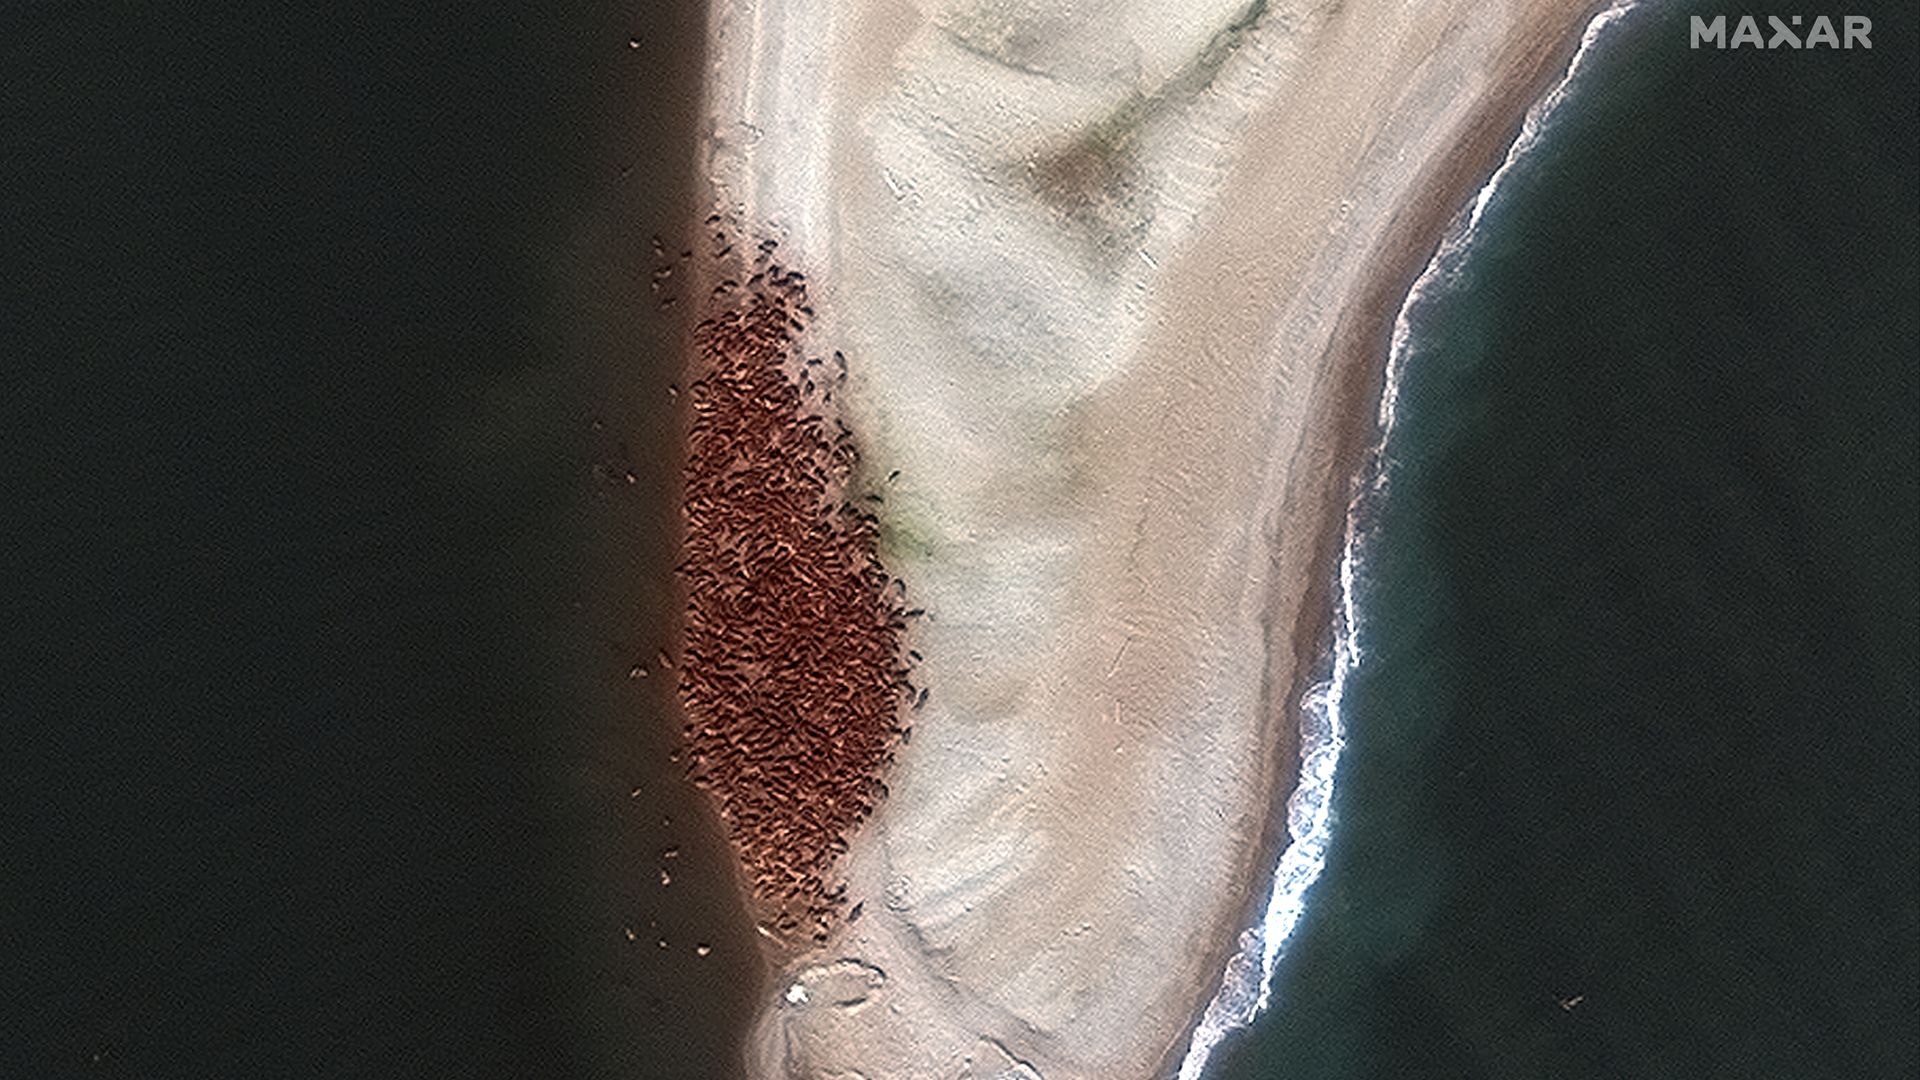 Walruses seen through satellite imagery. Image courtesy of Maxar Technologies.